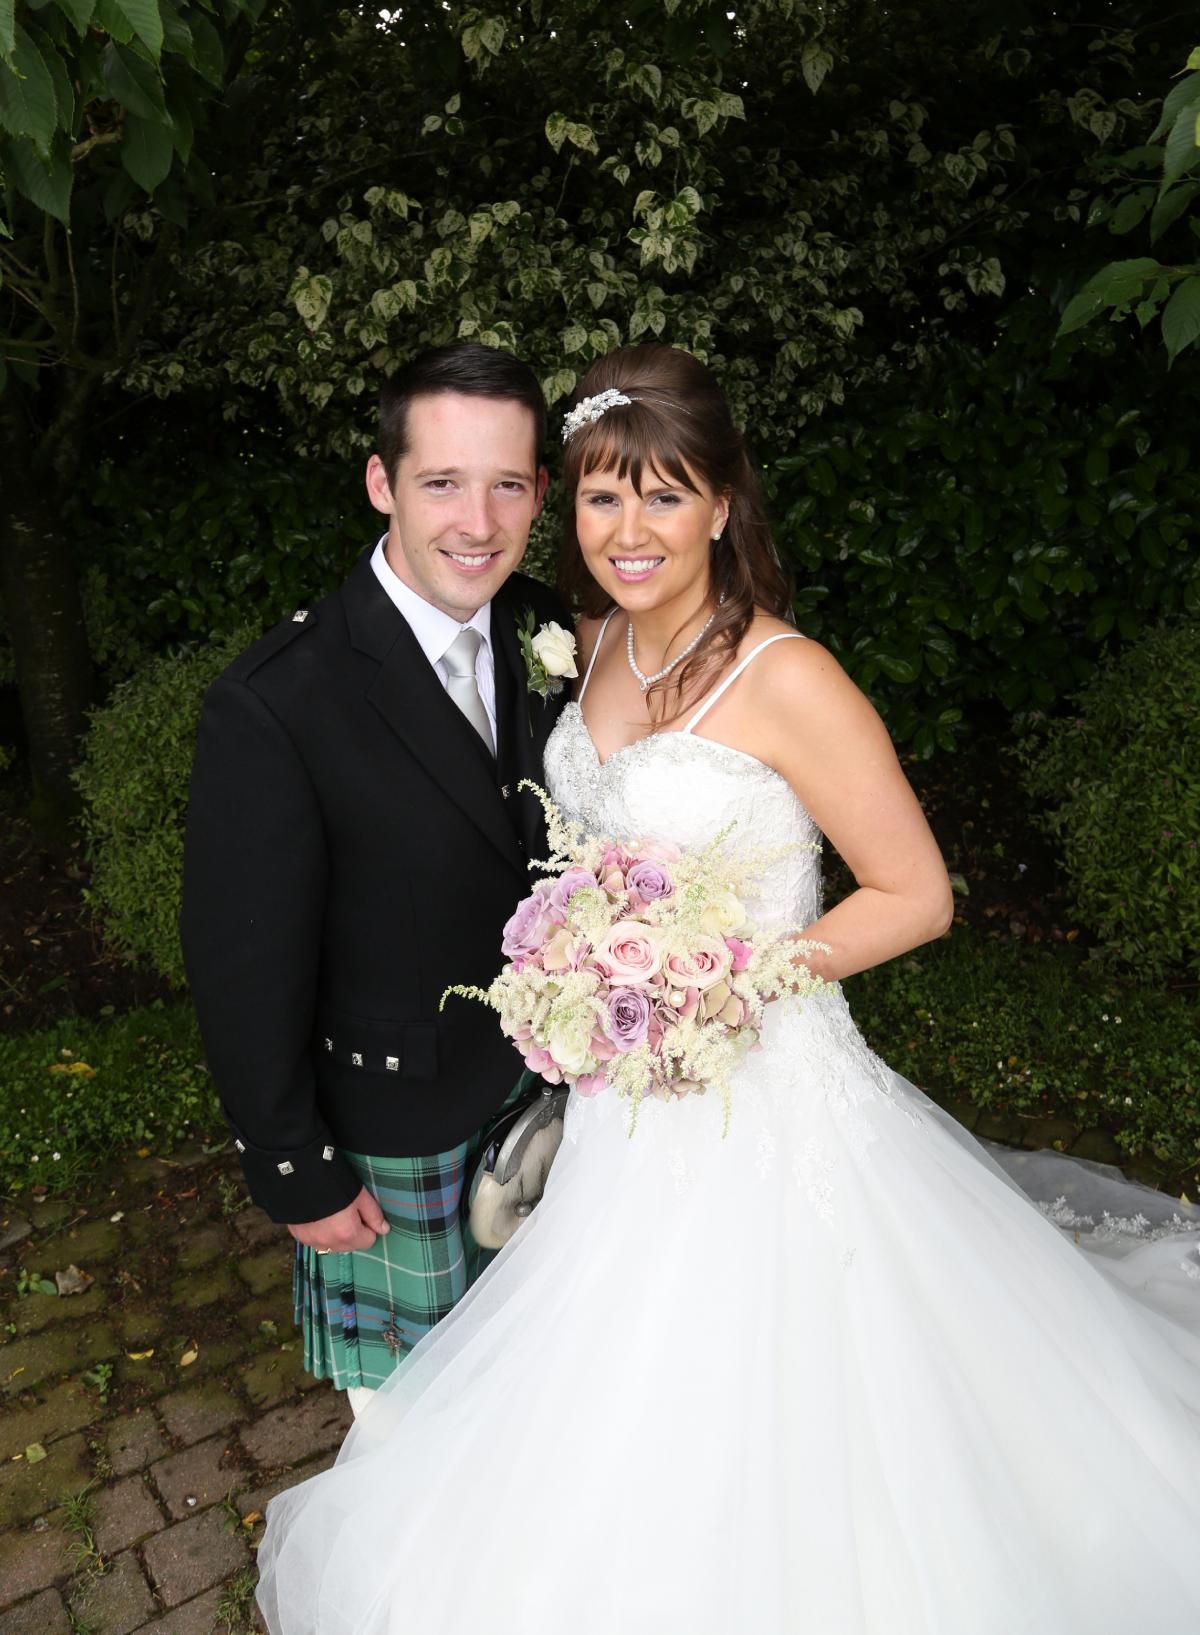 Valerie Neil of Tarbolton and Greg Philp from Barassie, Troon, were married at Tarbolton Parish Church. Photo: Ryan Mimiec Photography
